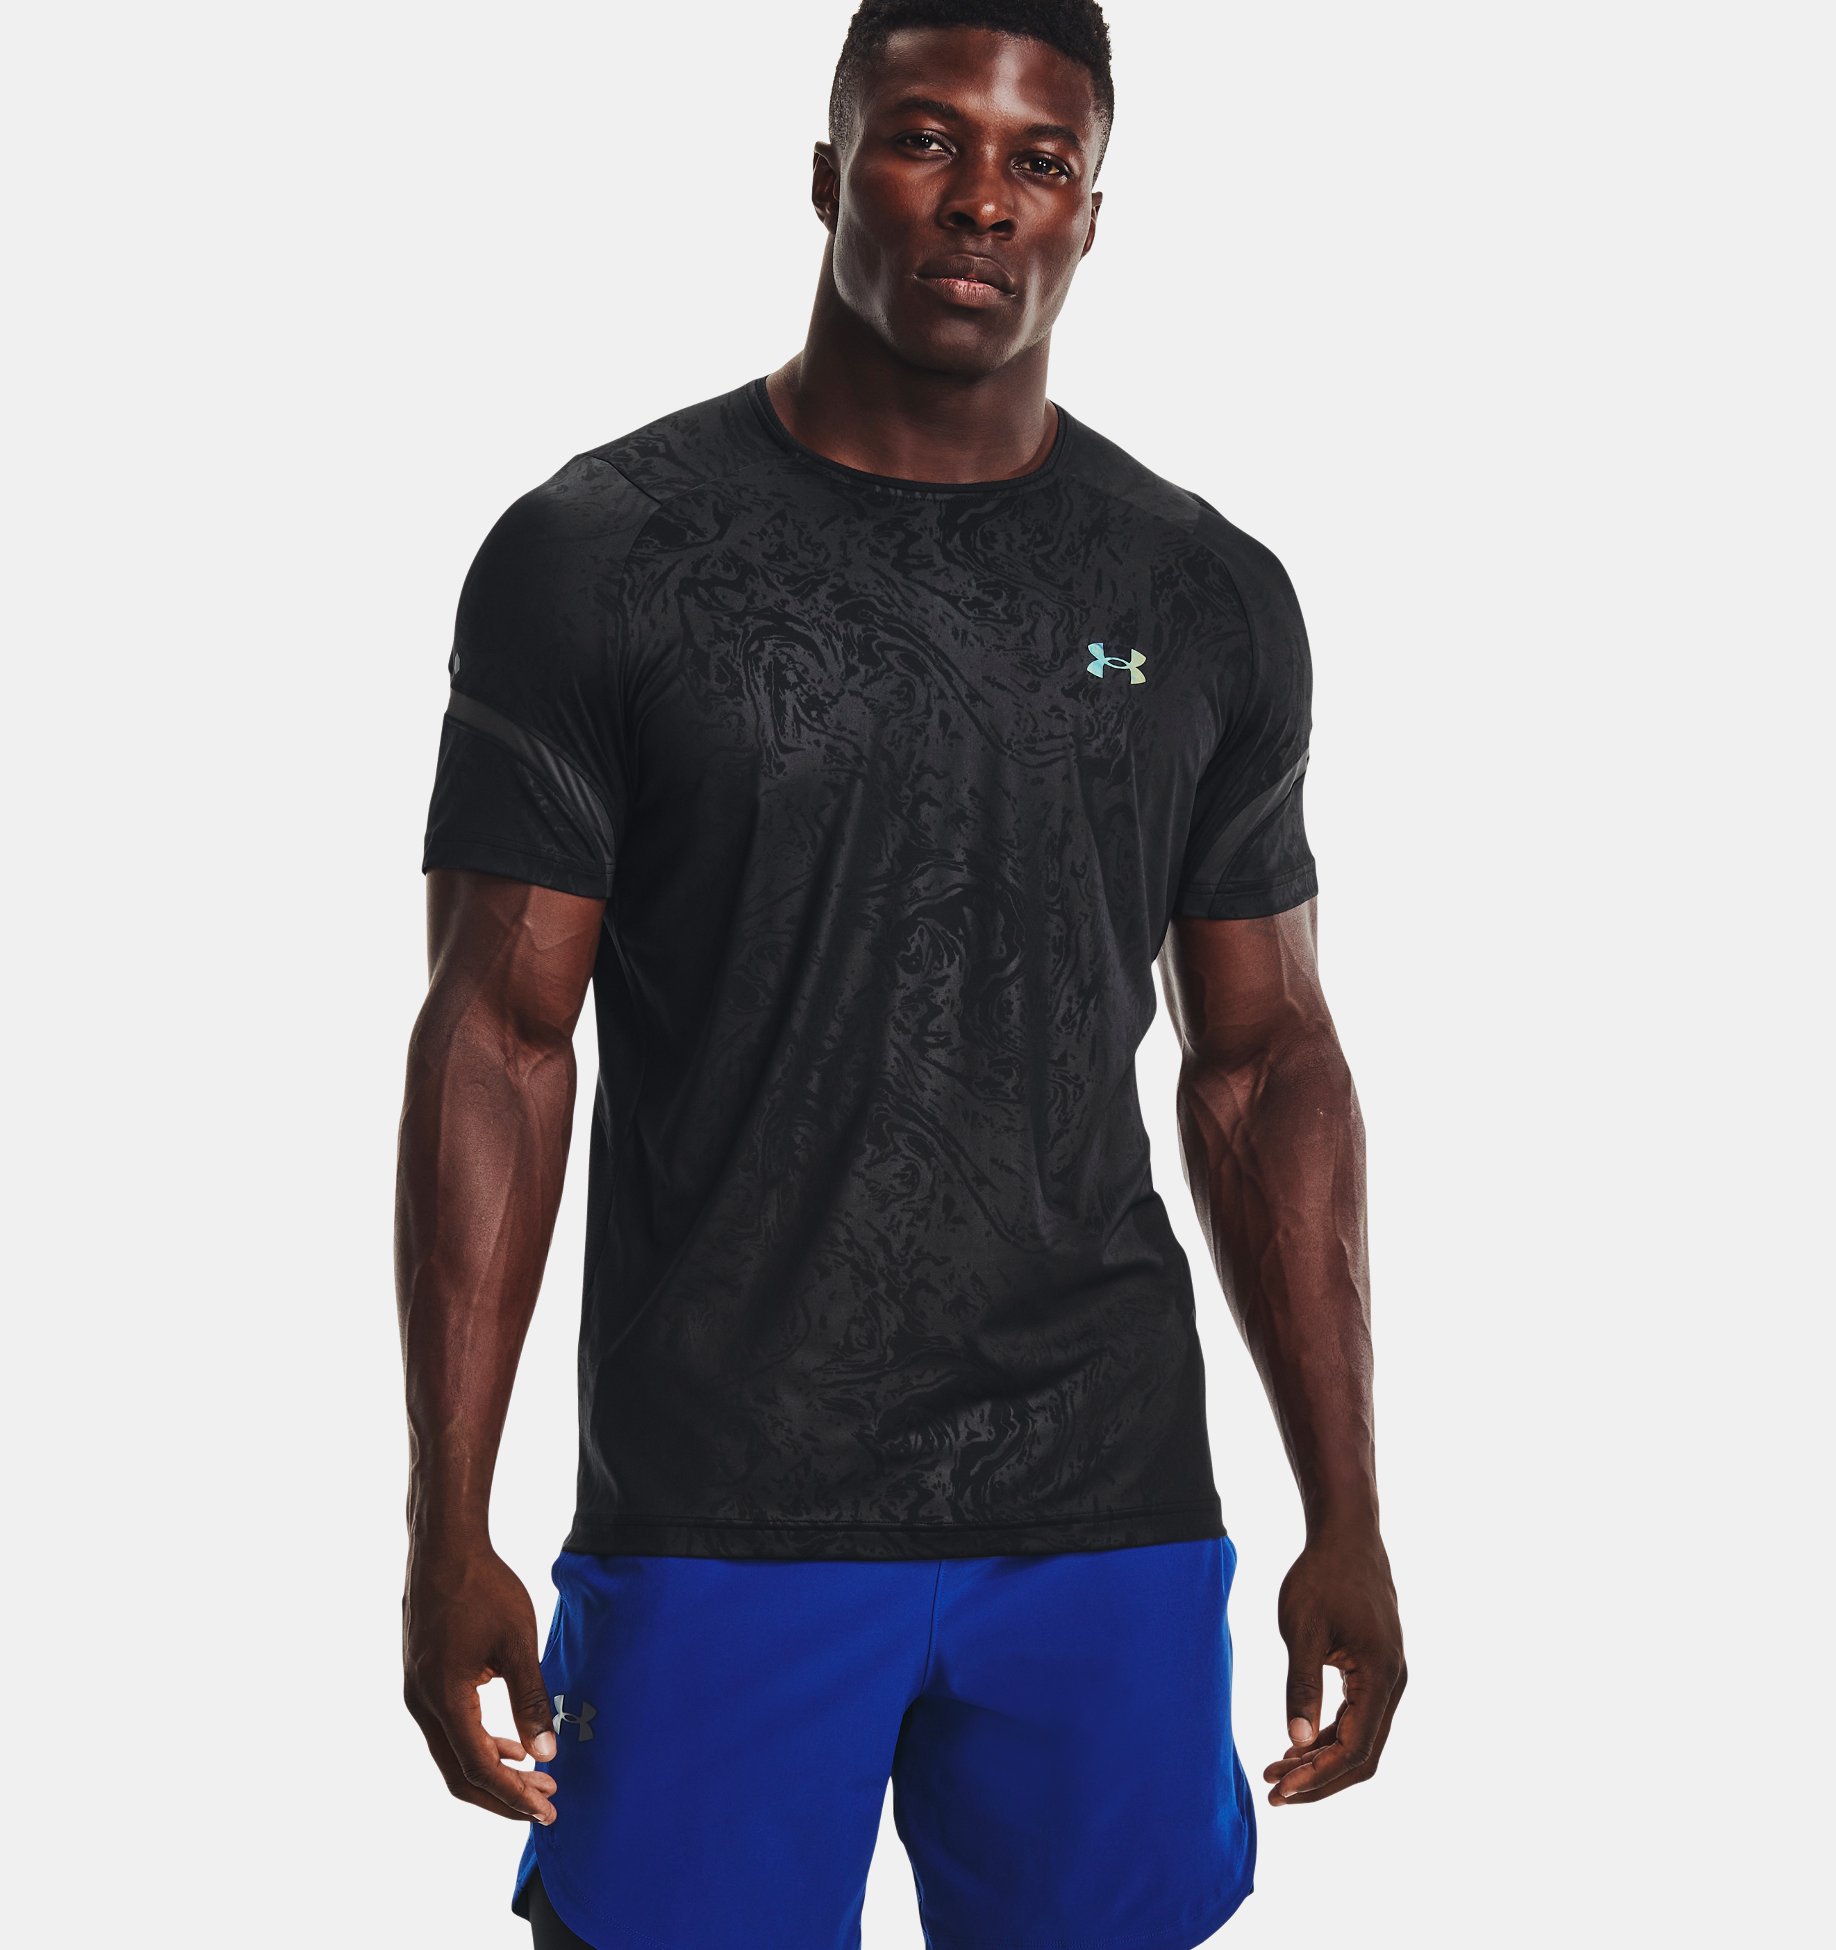 https://www.underarmour.com.ar/on/demandware.static/-/Sites-underarmour_staging/default/dw3bfc4bbc/new_images/1370318/195252590192/195252590192-1.jpeg